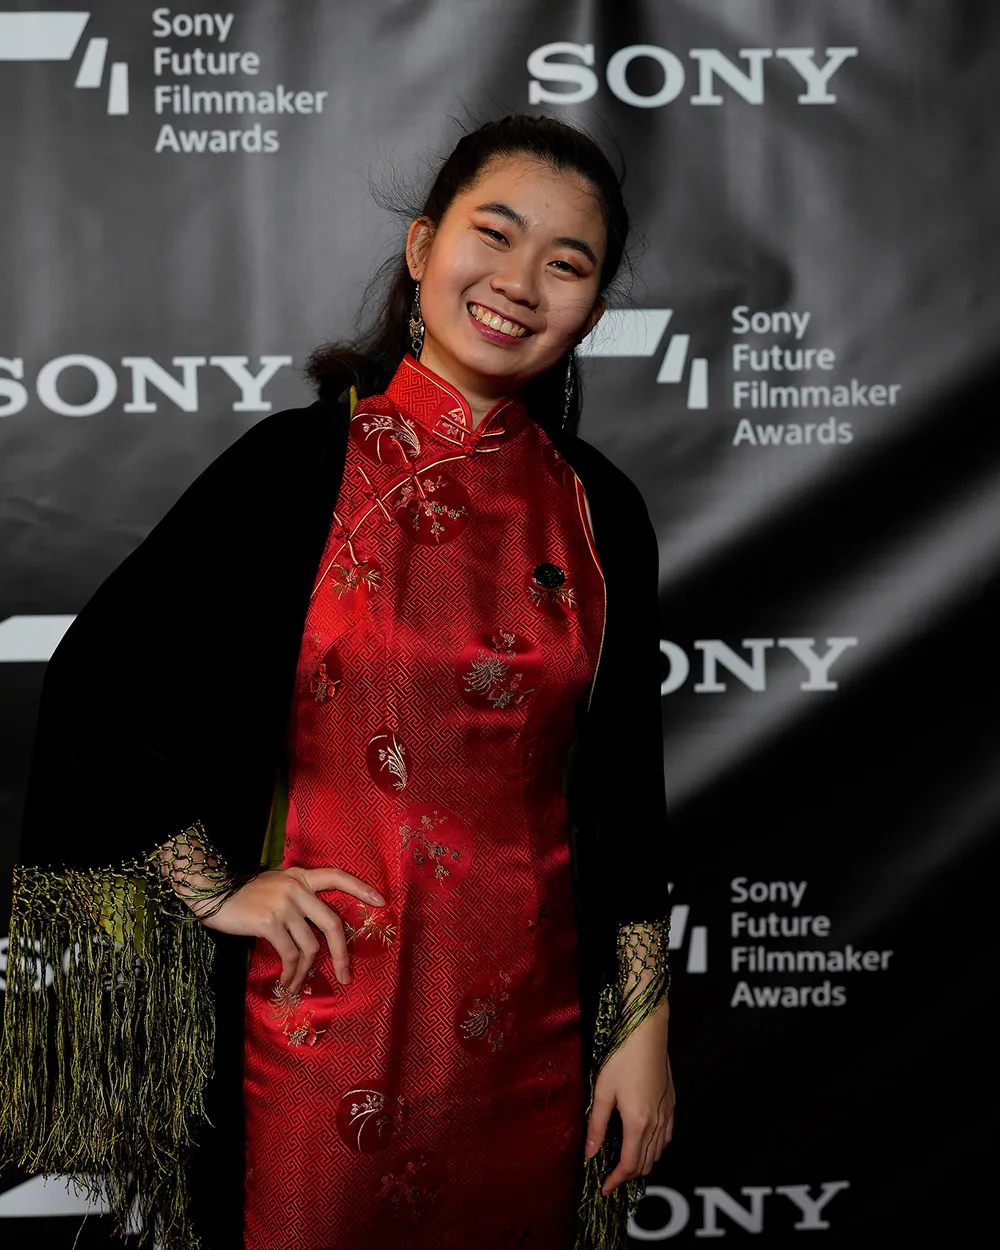 Shiao-ya (Maggie) Huang on the red carpet at the Sony Future Filmmaker Awards